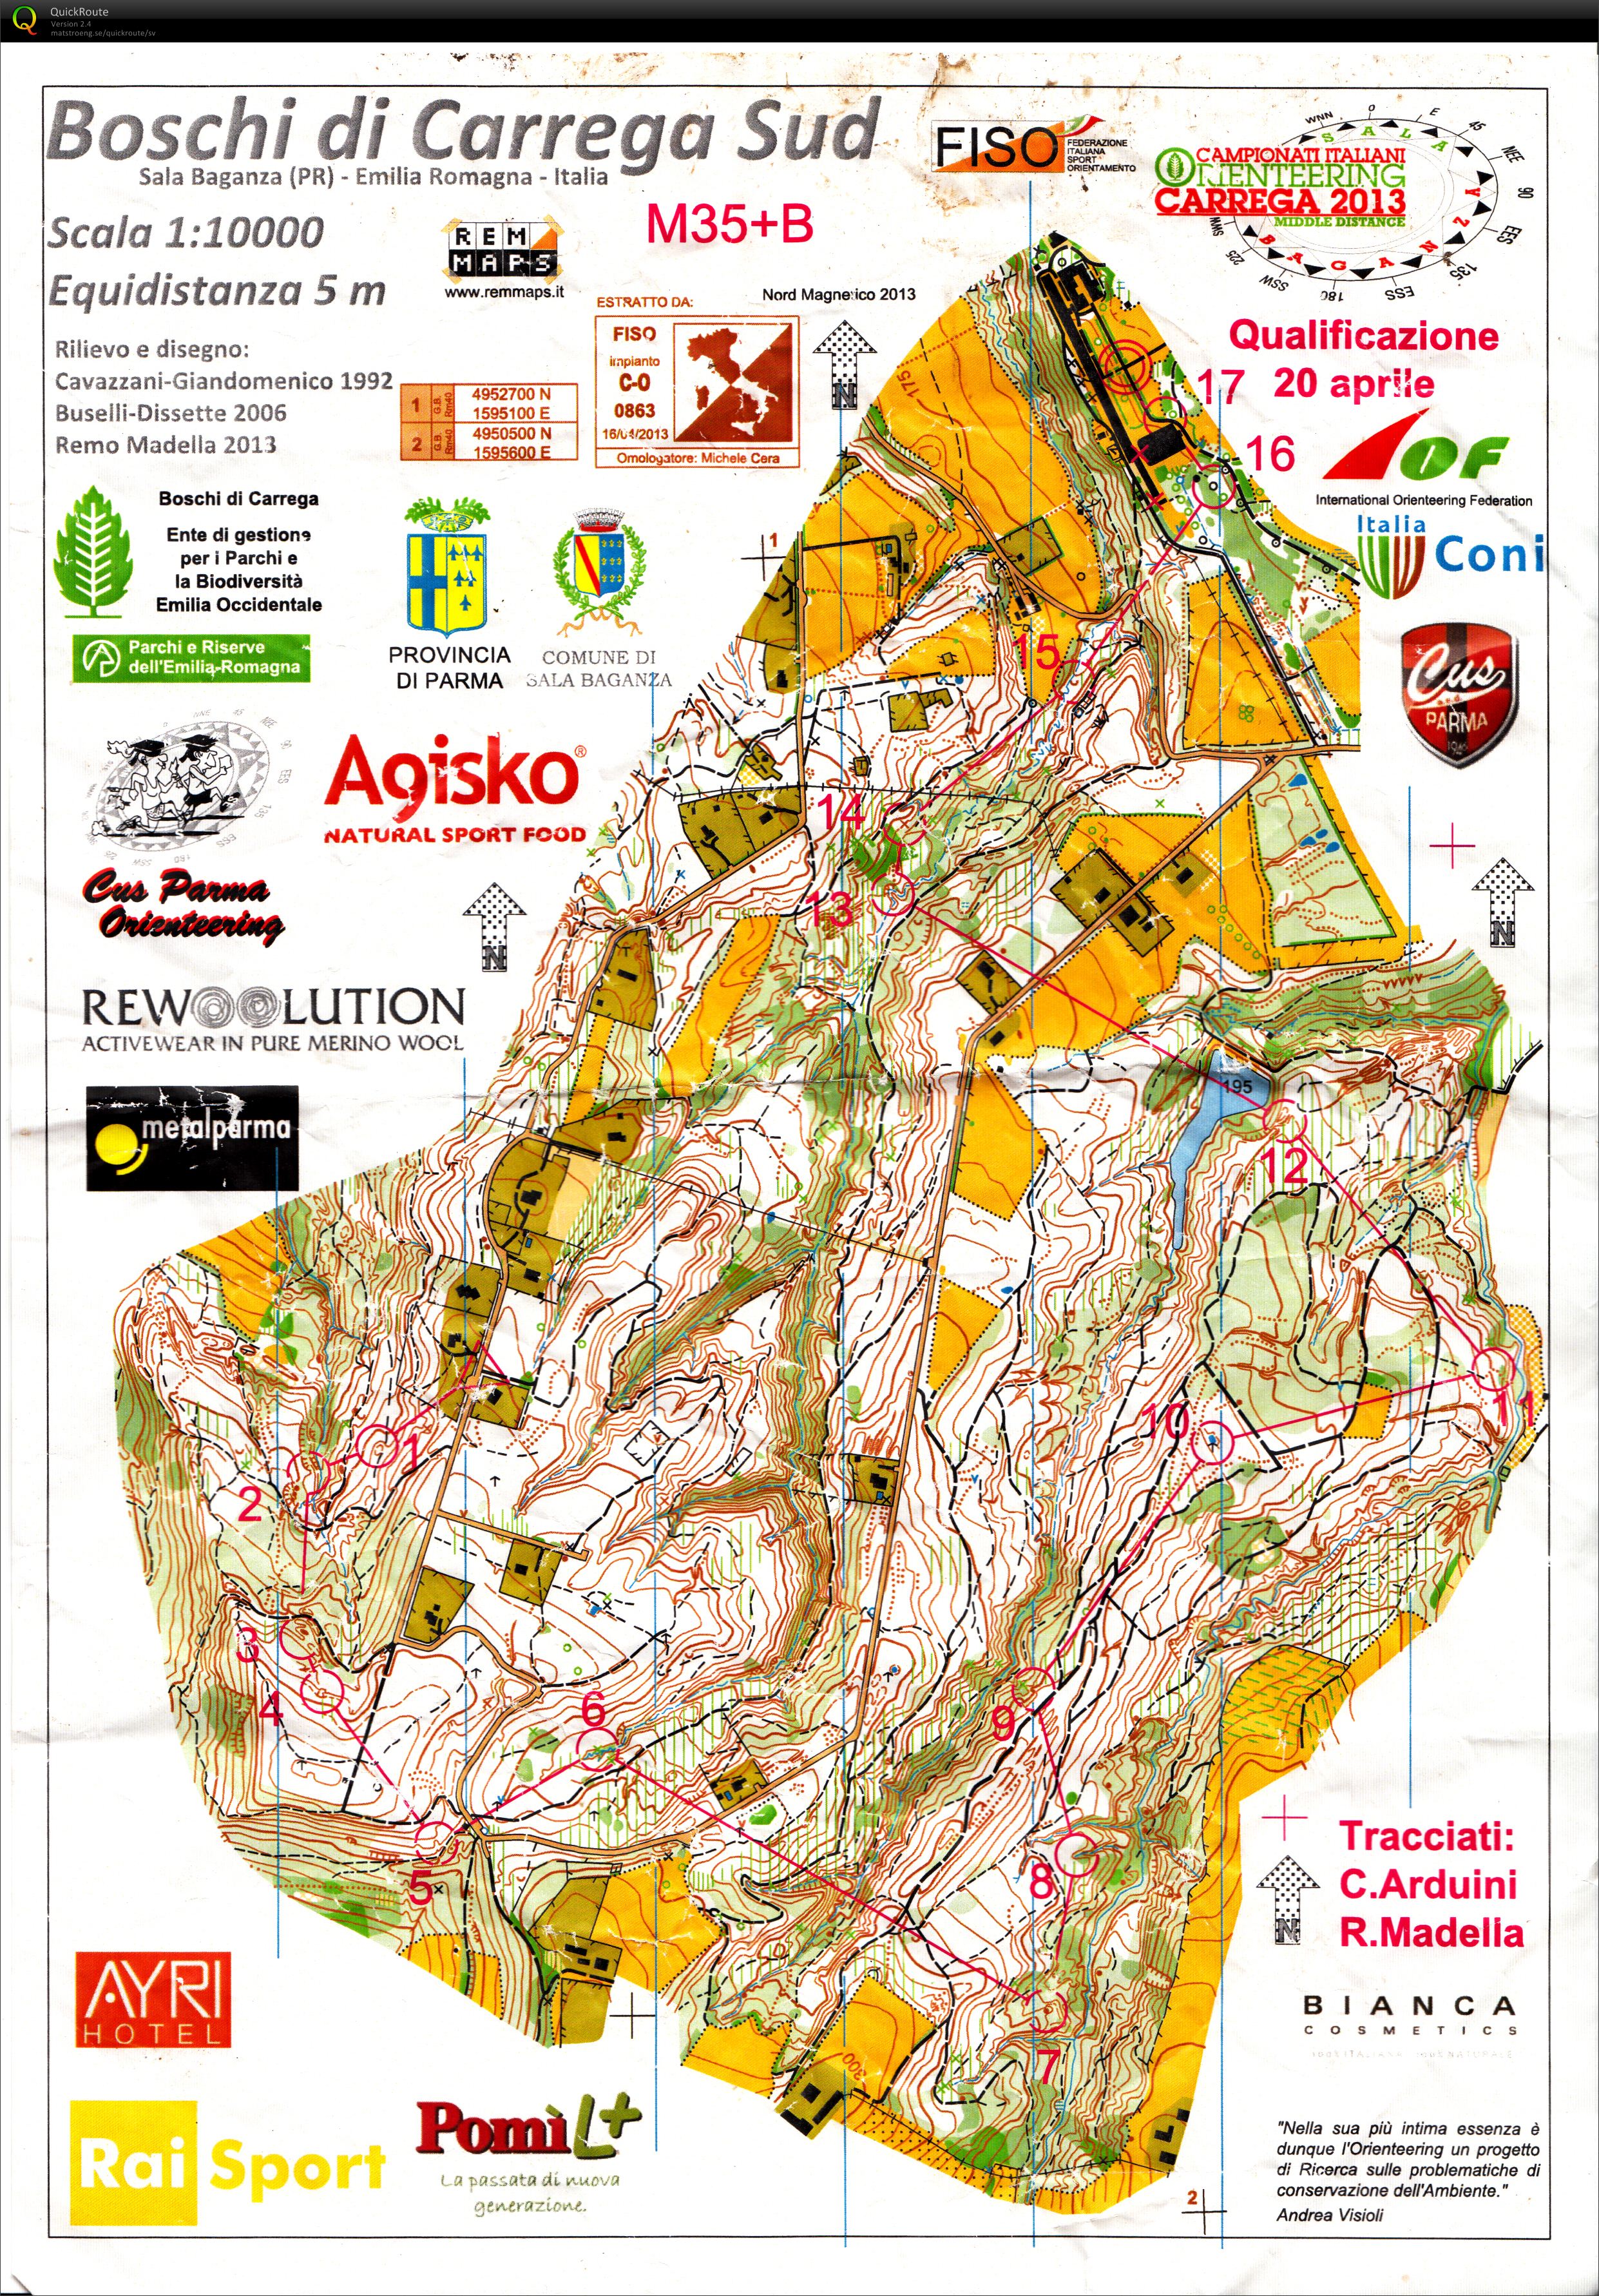 Italian Championship Middle Distance Qualification (20.04.2013)